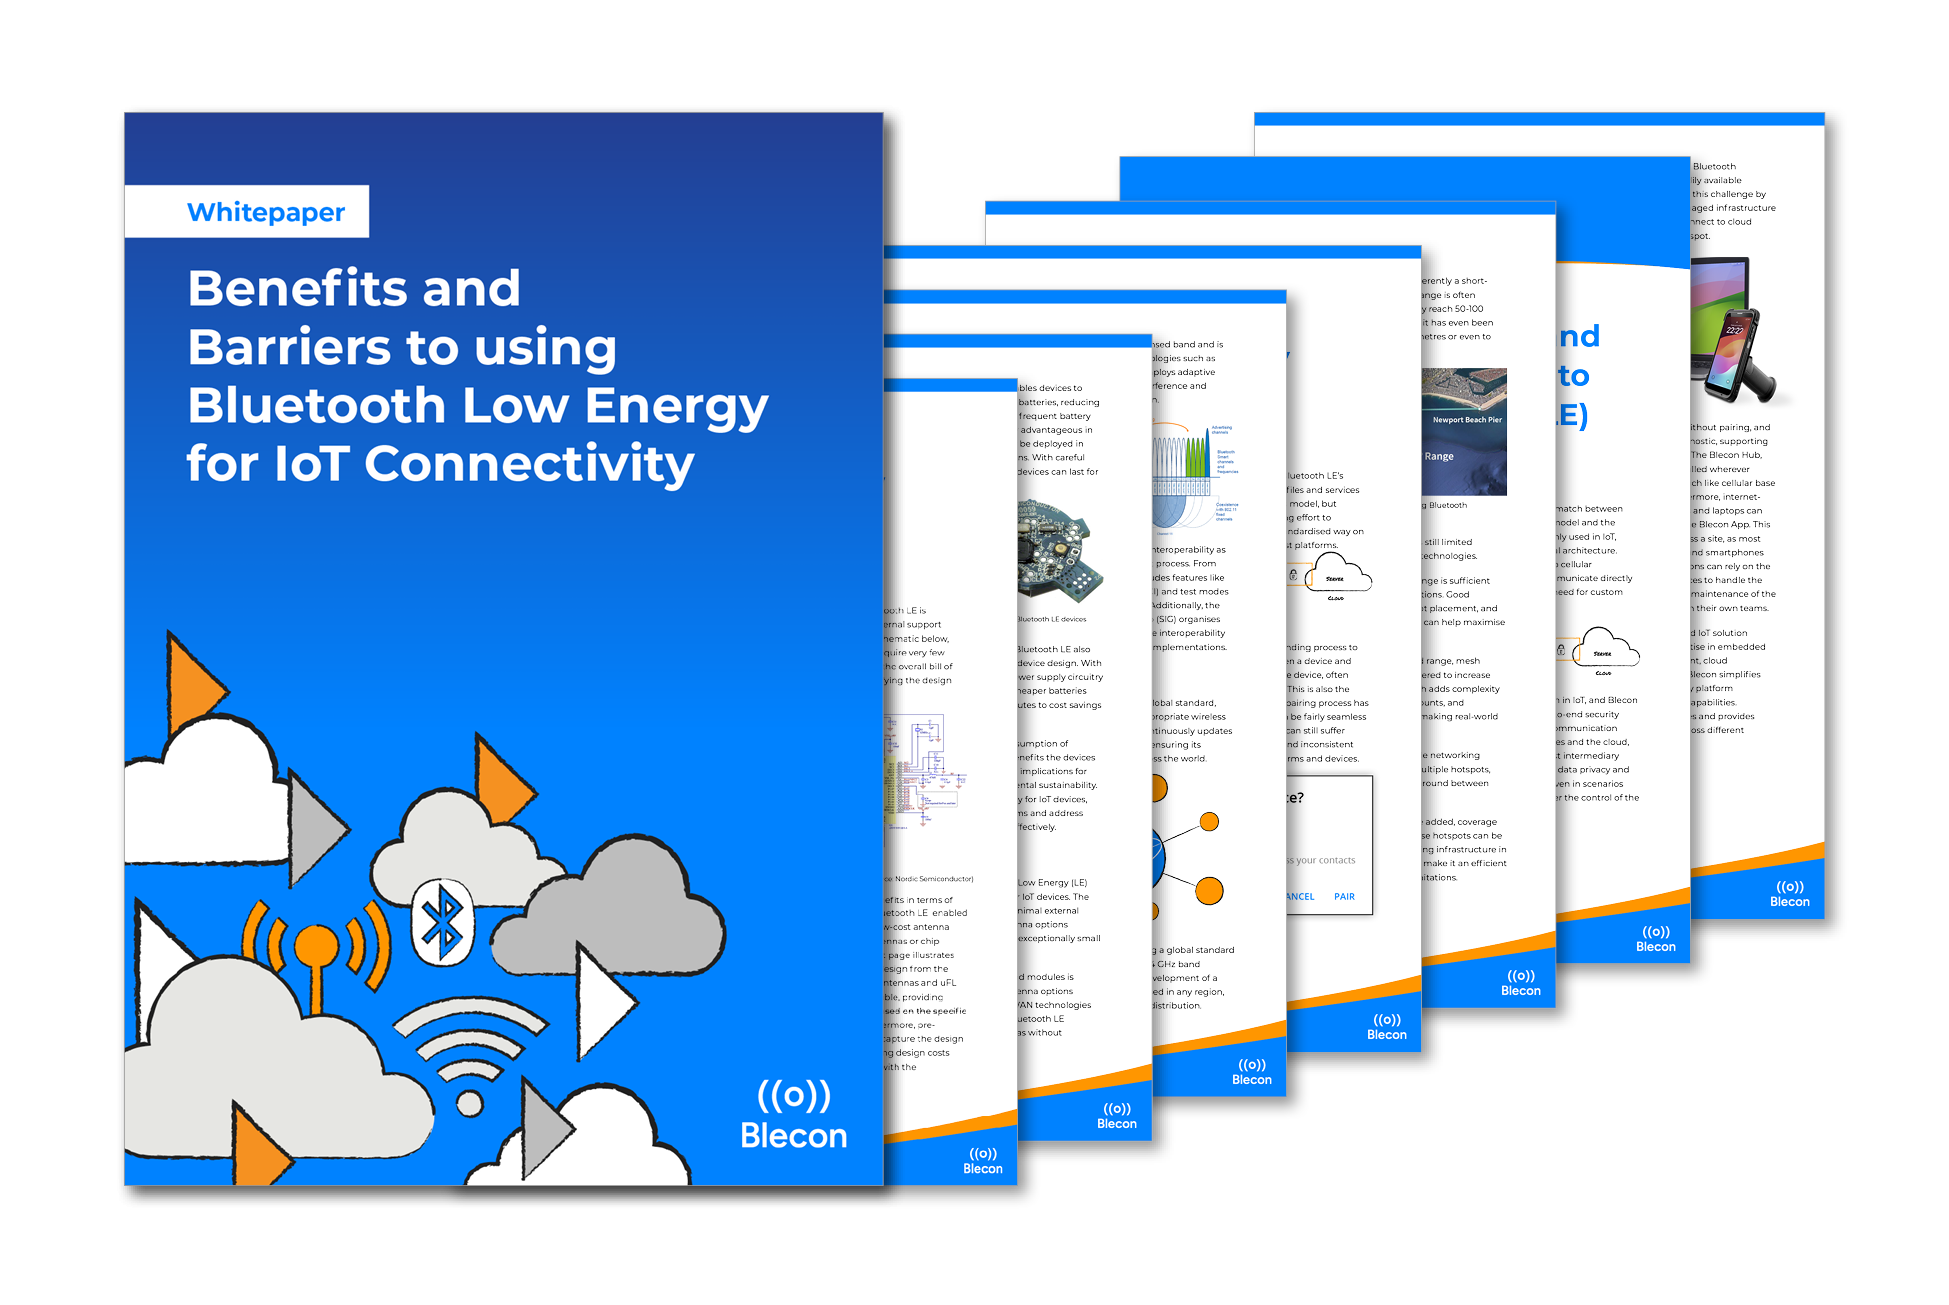 Whitepaper Available: Benefits and Barriers to Using Bluetooth Low Energy for IoT Connectivity